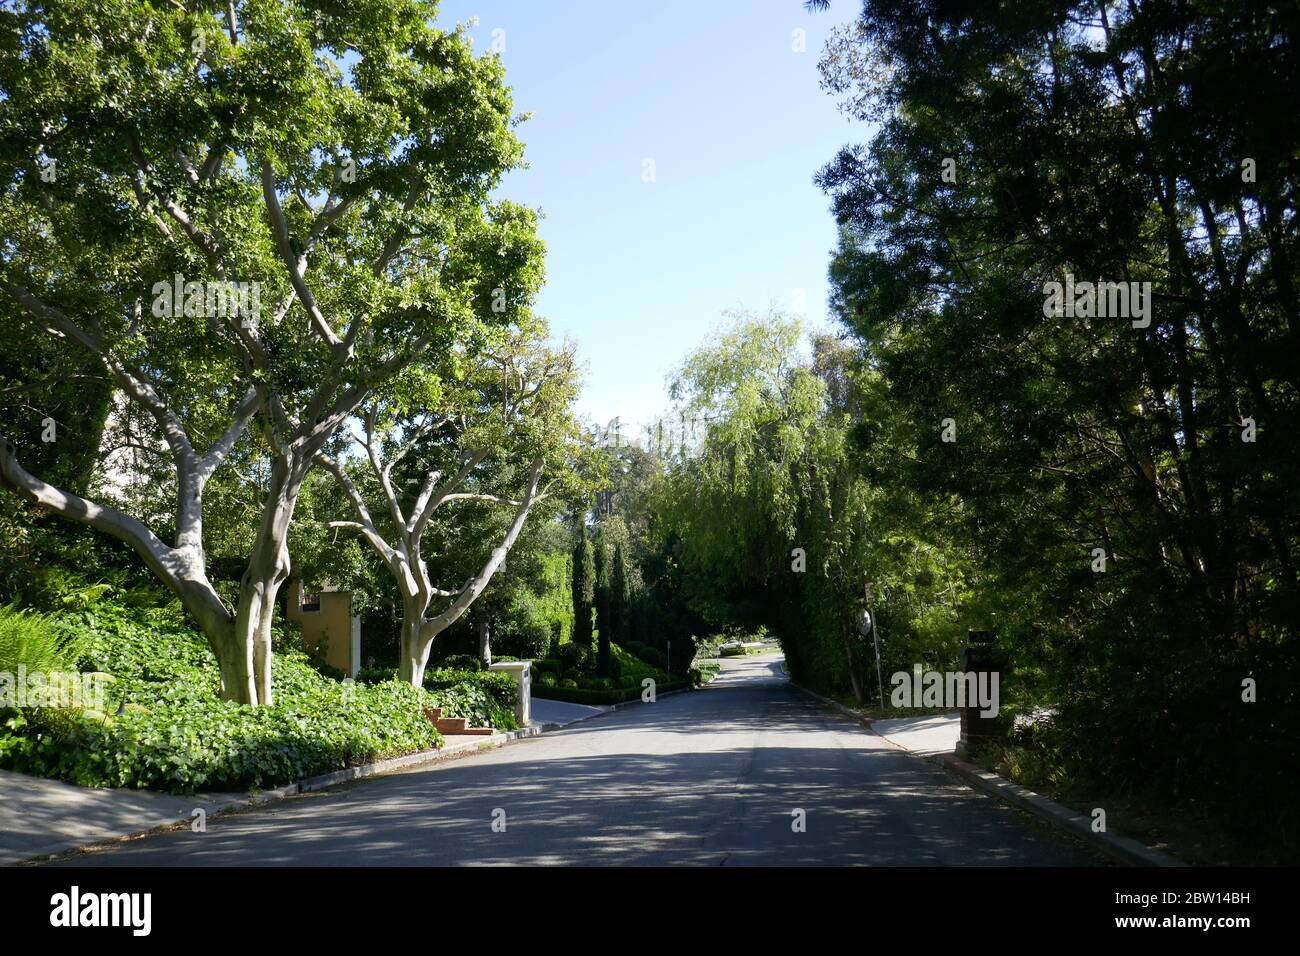 Beverly Hills, California, USA 28th May 2020 A general view of atmosphere Trees and street on May 28, 2020 in Beverly Hills, California, USA. Photo by Barry King/Alamy Stock Photo Stock Photo